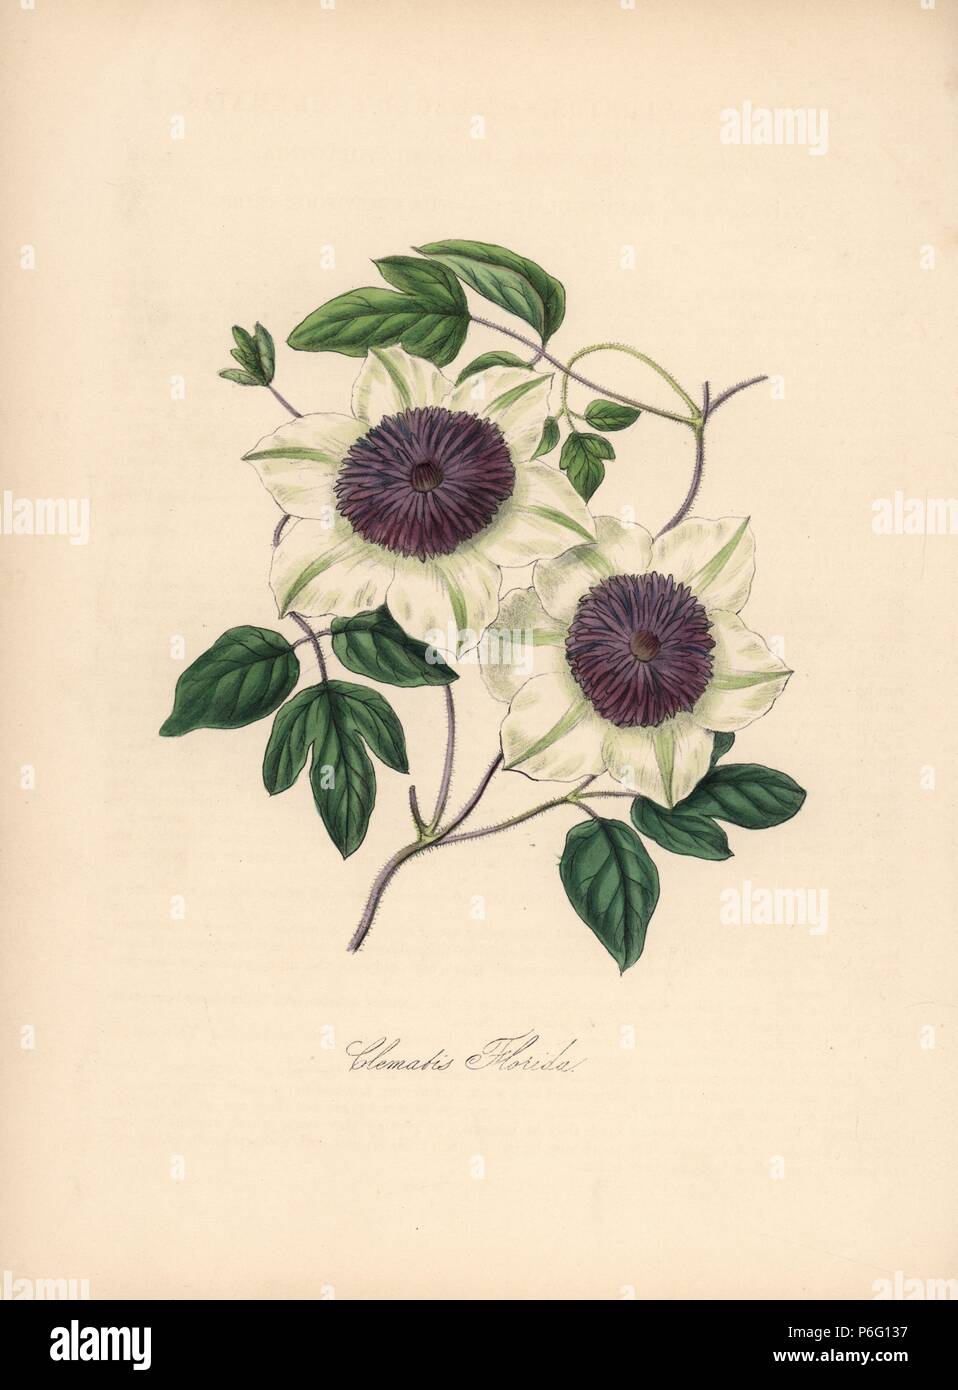 Passionflower clematis, Clematis florida. Handcoloured zincograph by C. Chabot drawn by Miss M. A. Burnett from her 'Plantae Utiliores: or Illustrations of Useful Plants,' Whittaker, London, 1842. Miss Burnett drew the botanical illustrations, but the text was chiefly by her late brother, British botanist Gilbert Thomas Burnett (1800-1835). Stock Photo